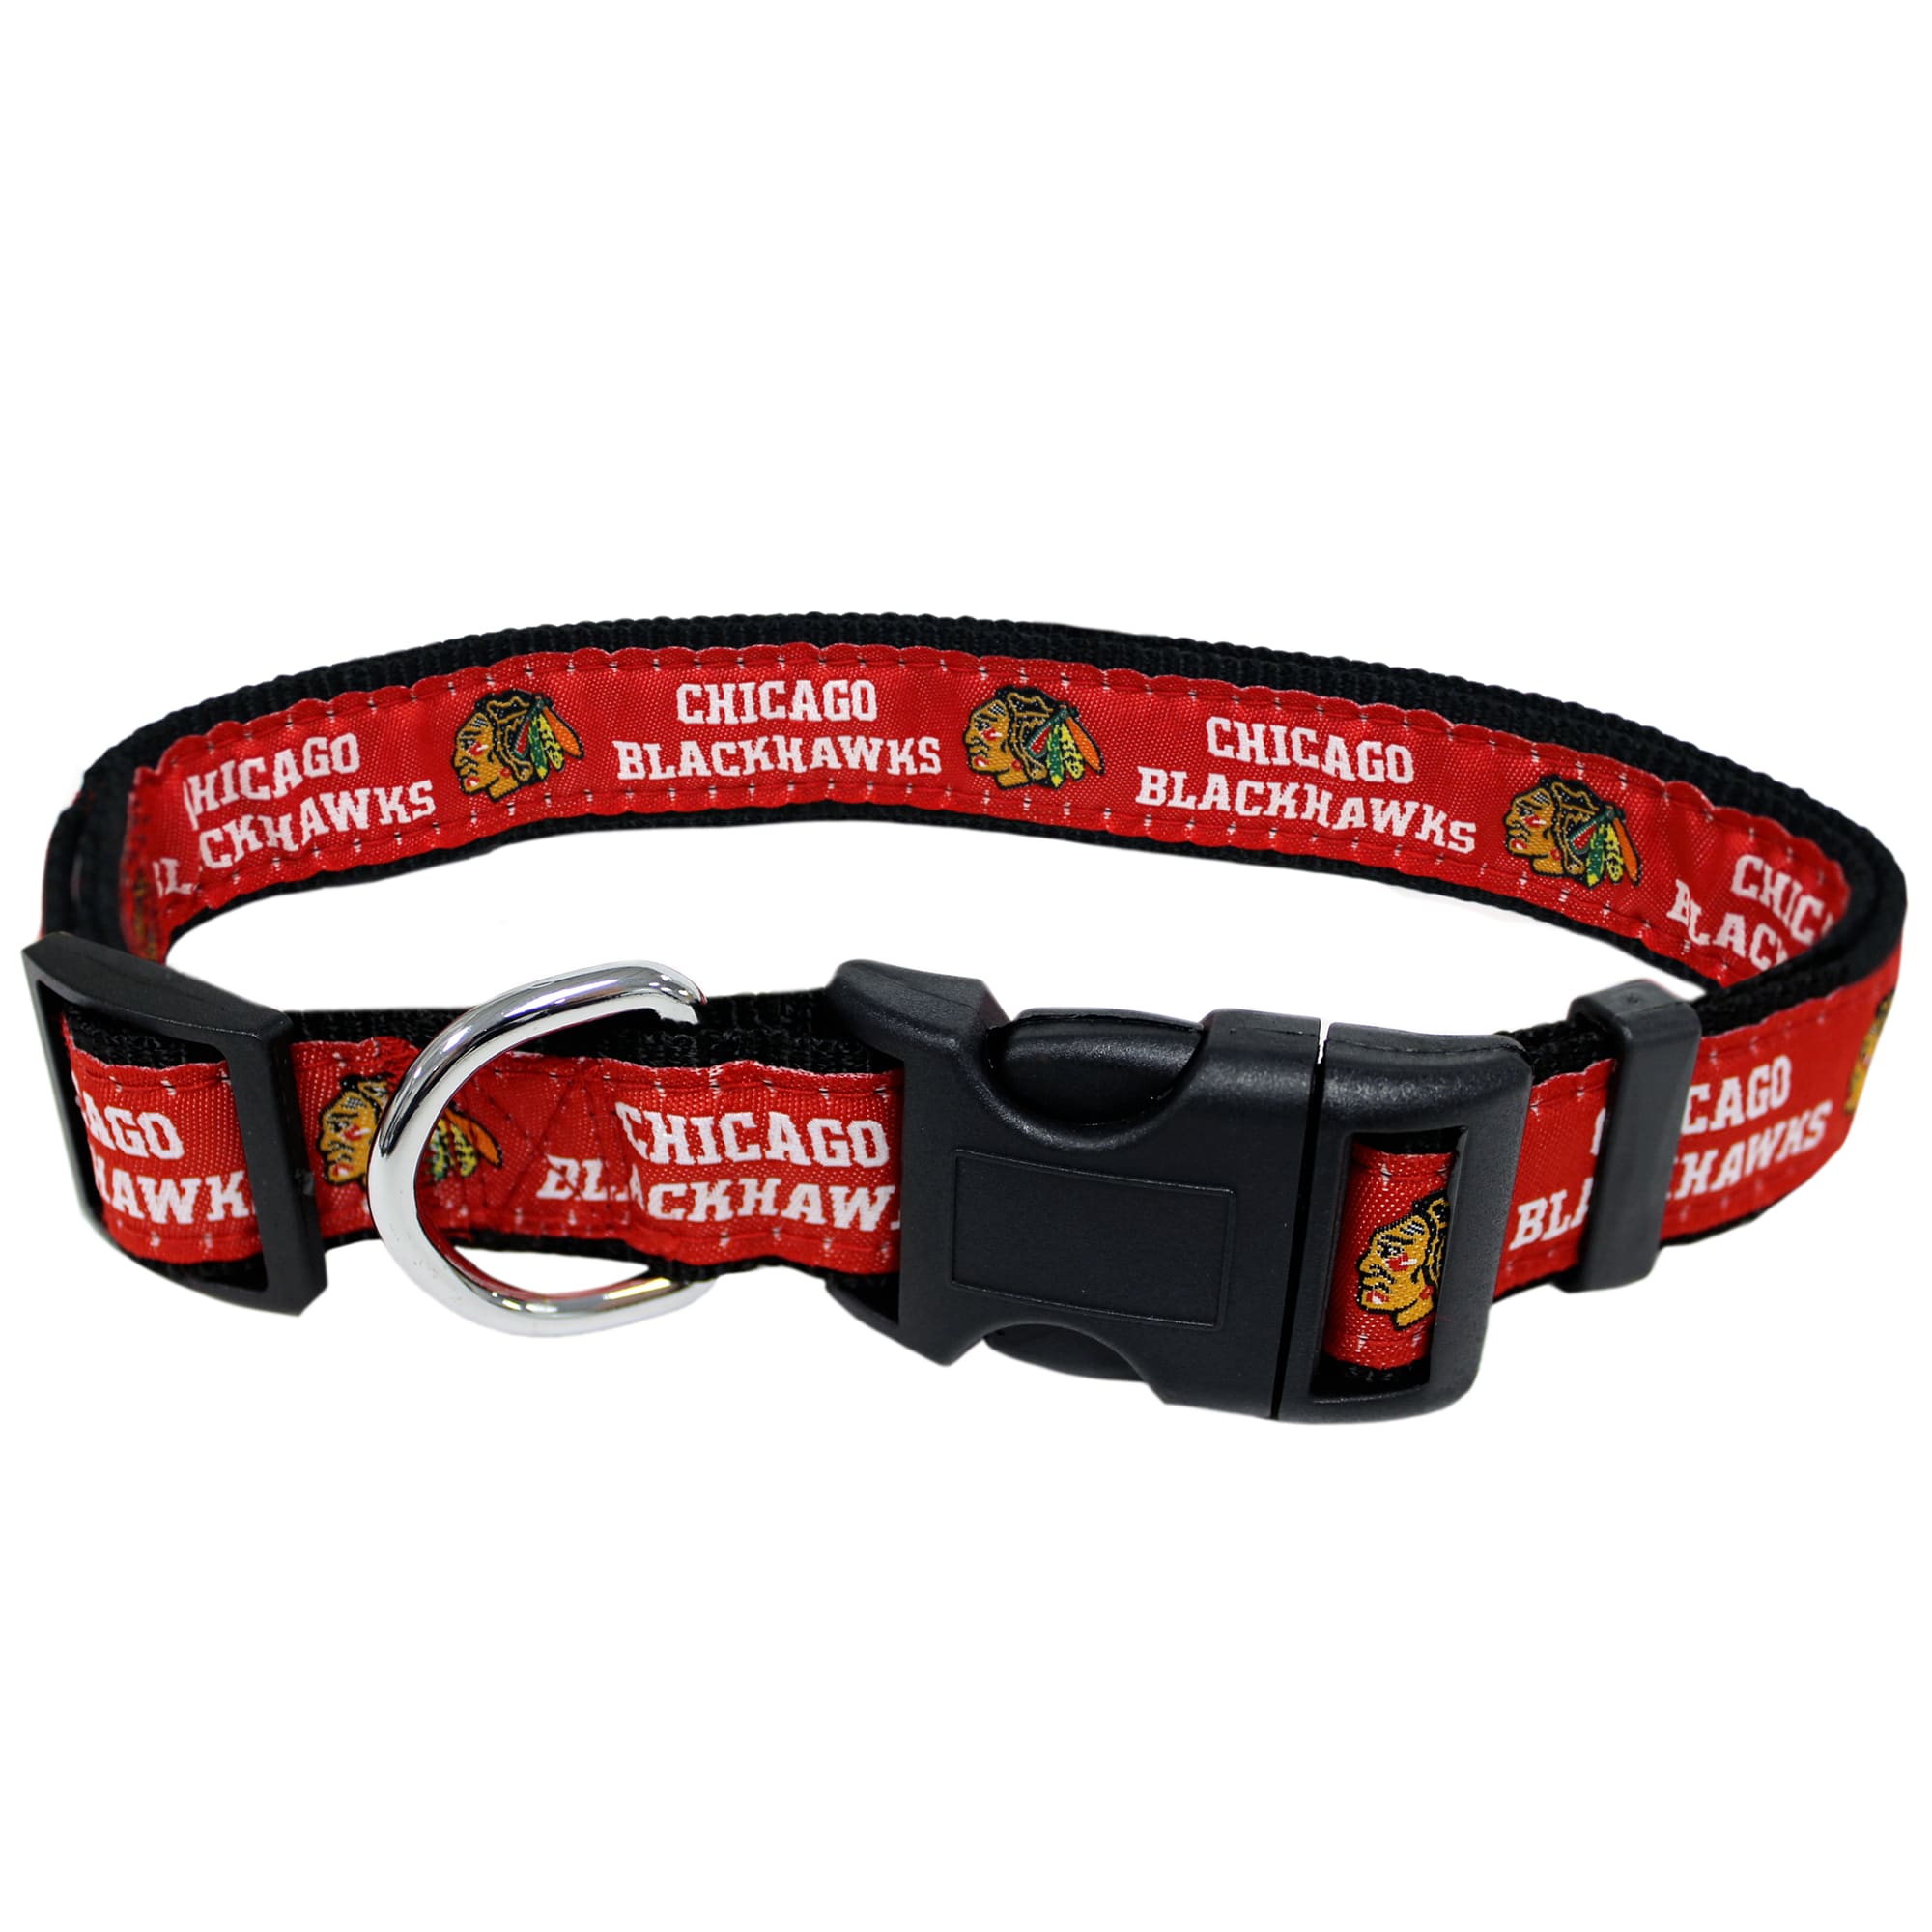 Photos - Collar / Harnesses Pets First Chicago Blackhawks Dog Collar, Large, Multi-Color BH 